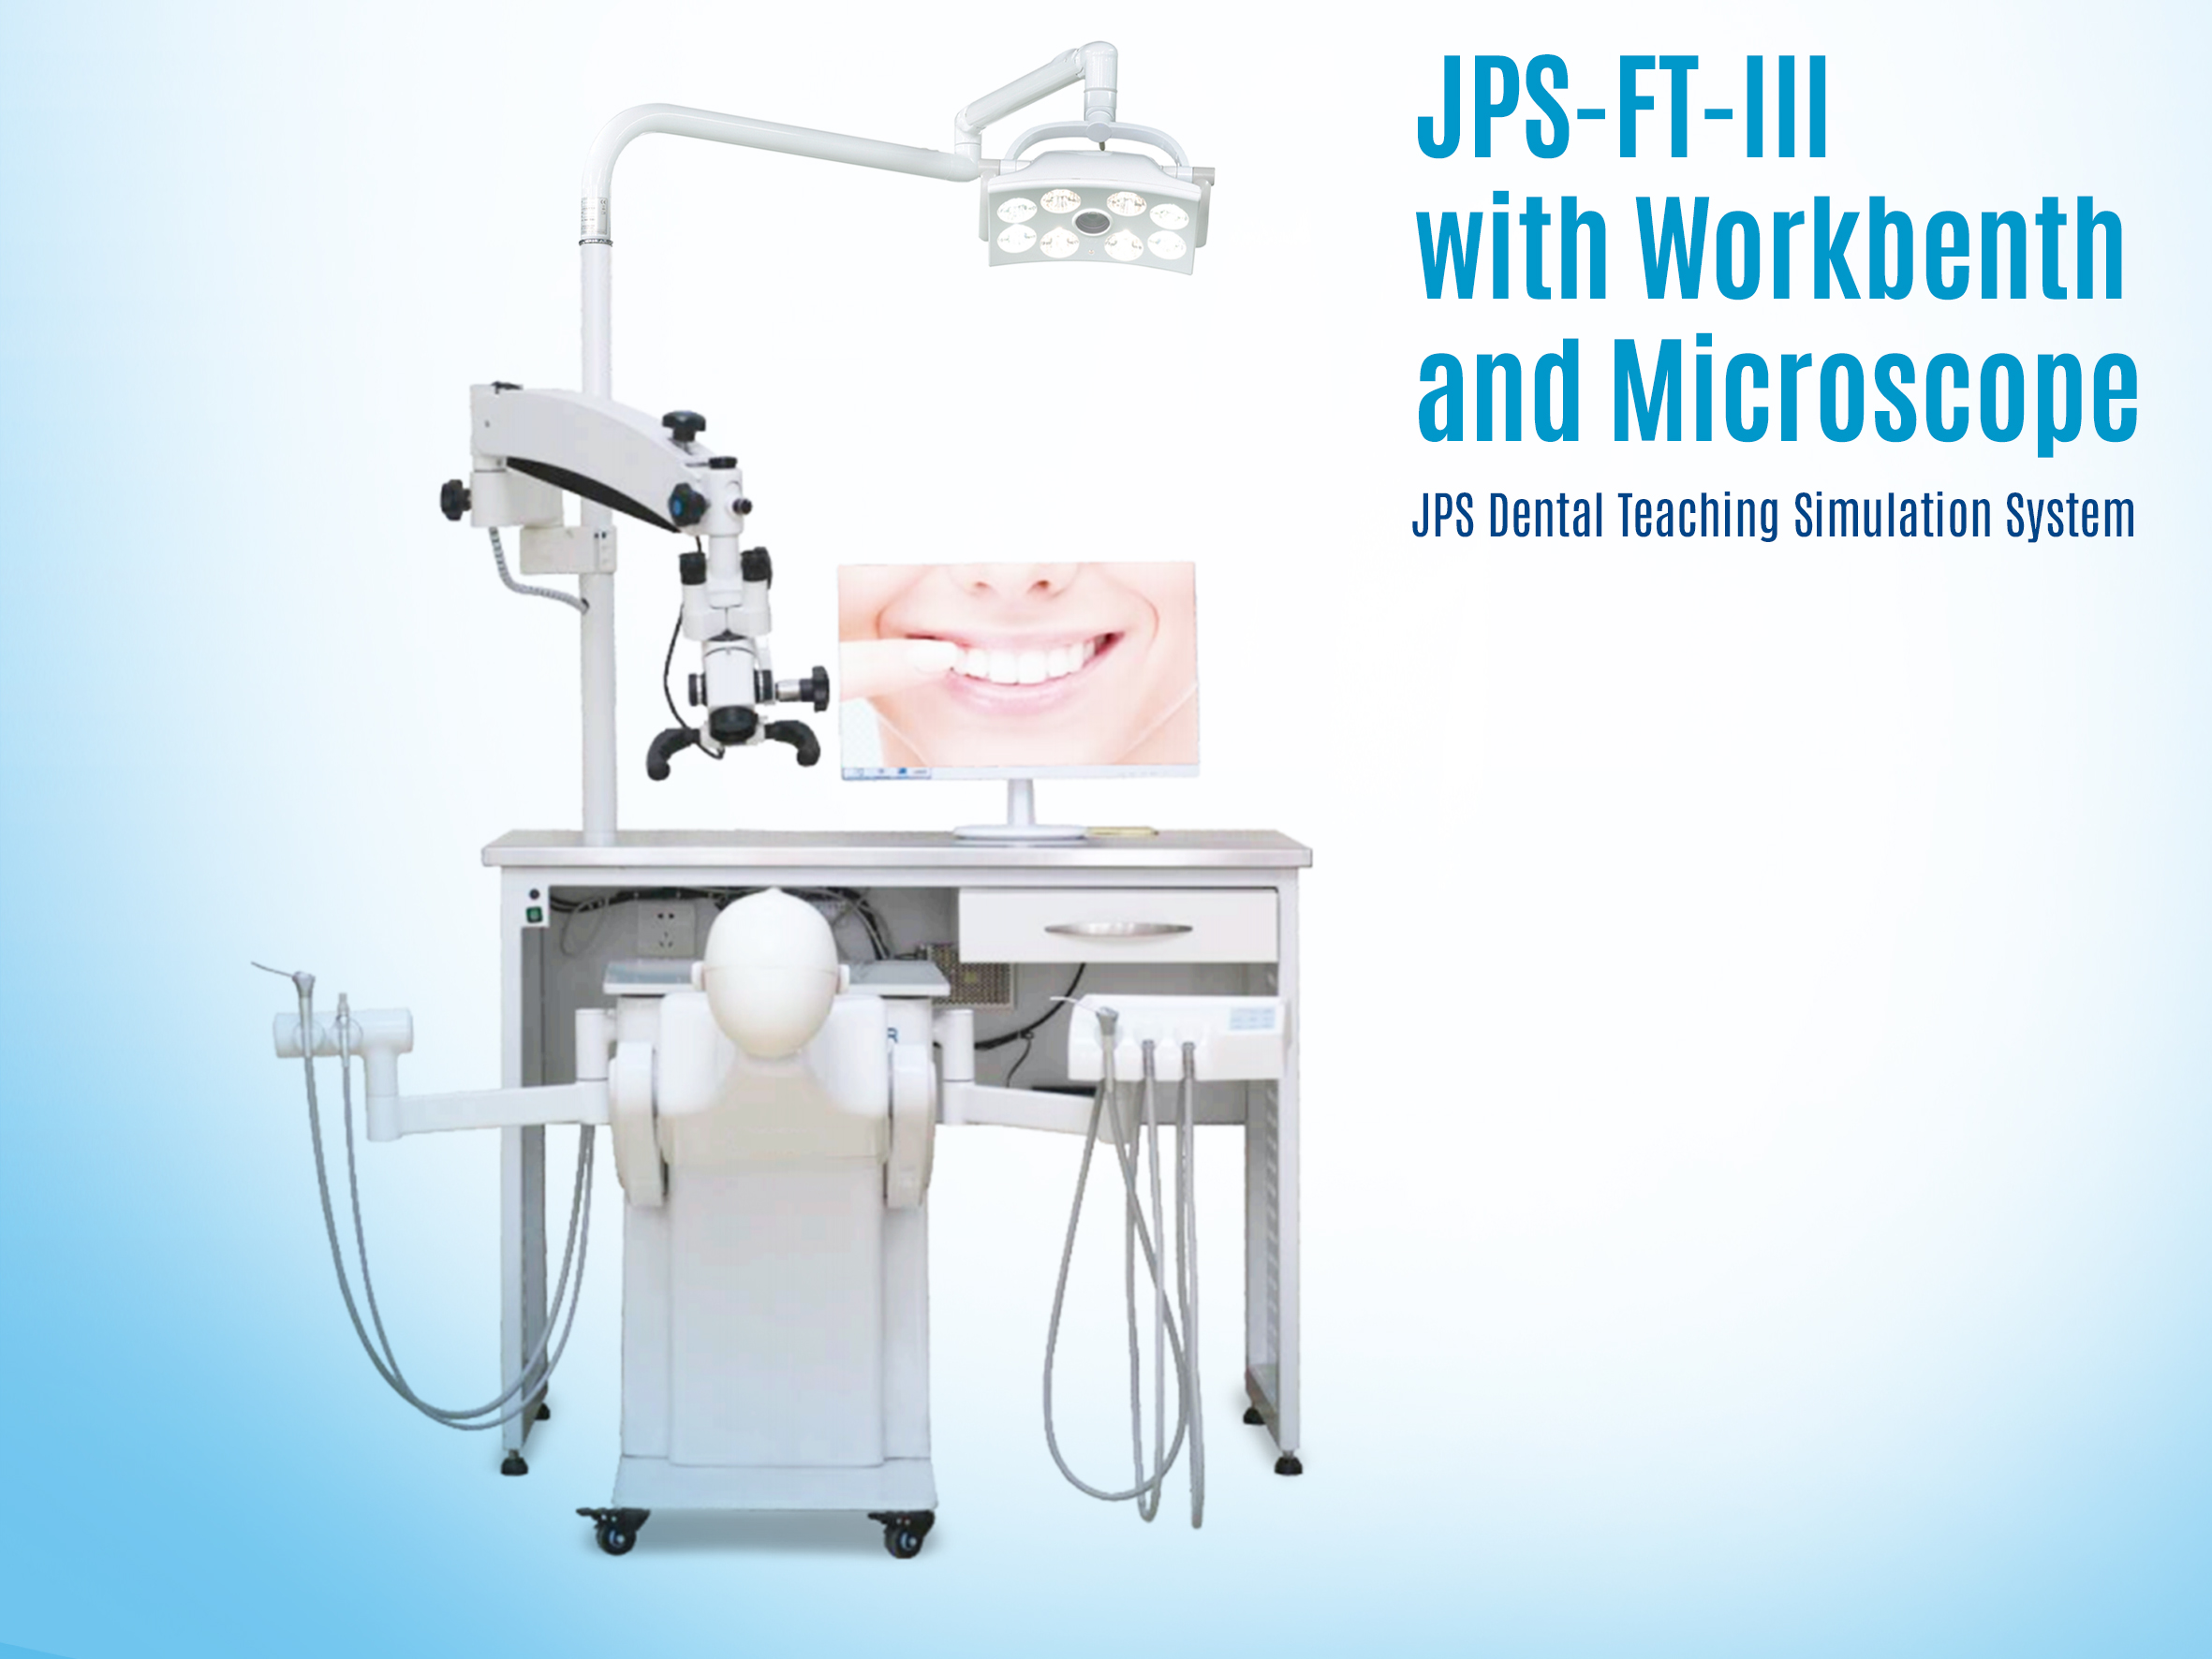 Shanghai JPS Medical Co., Ltd Unveils Advanced "Simulator with Workbench and Microscope" for Dental Education